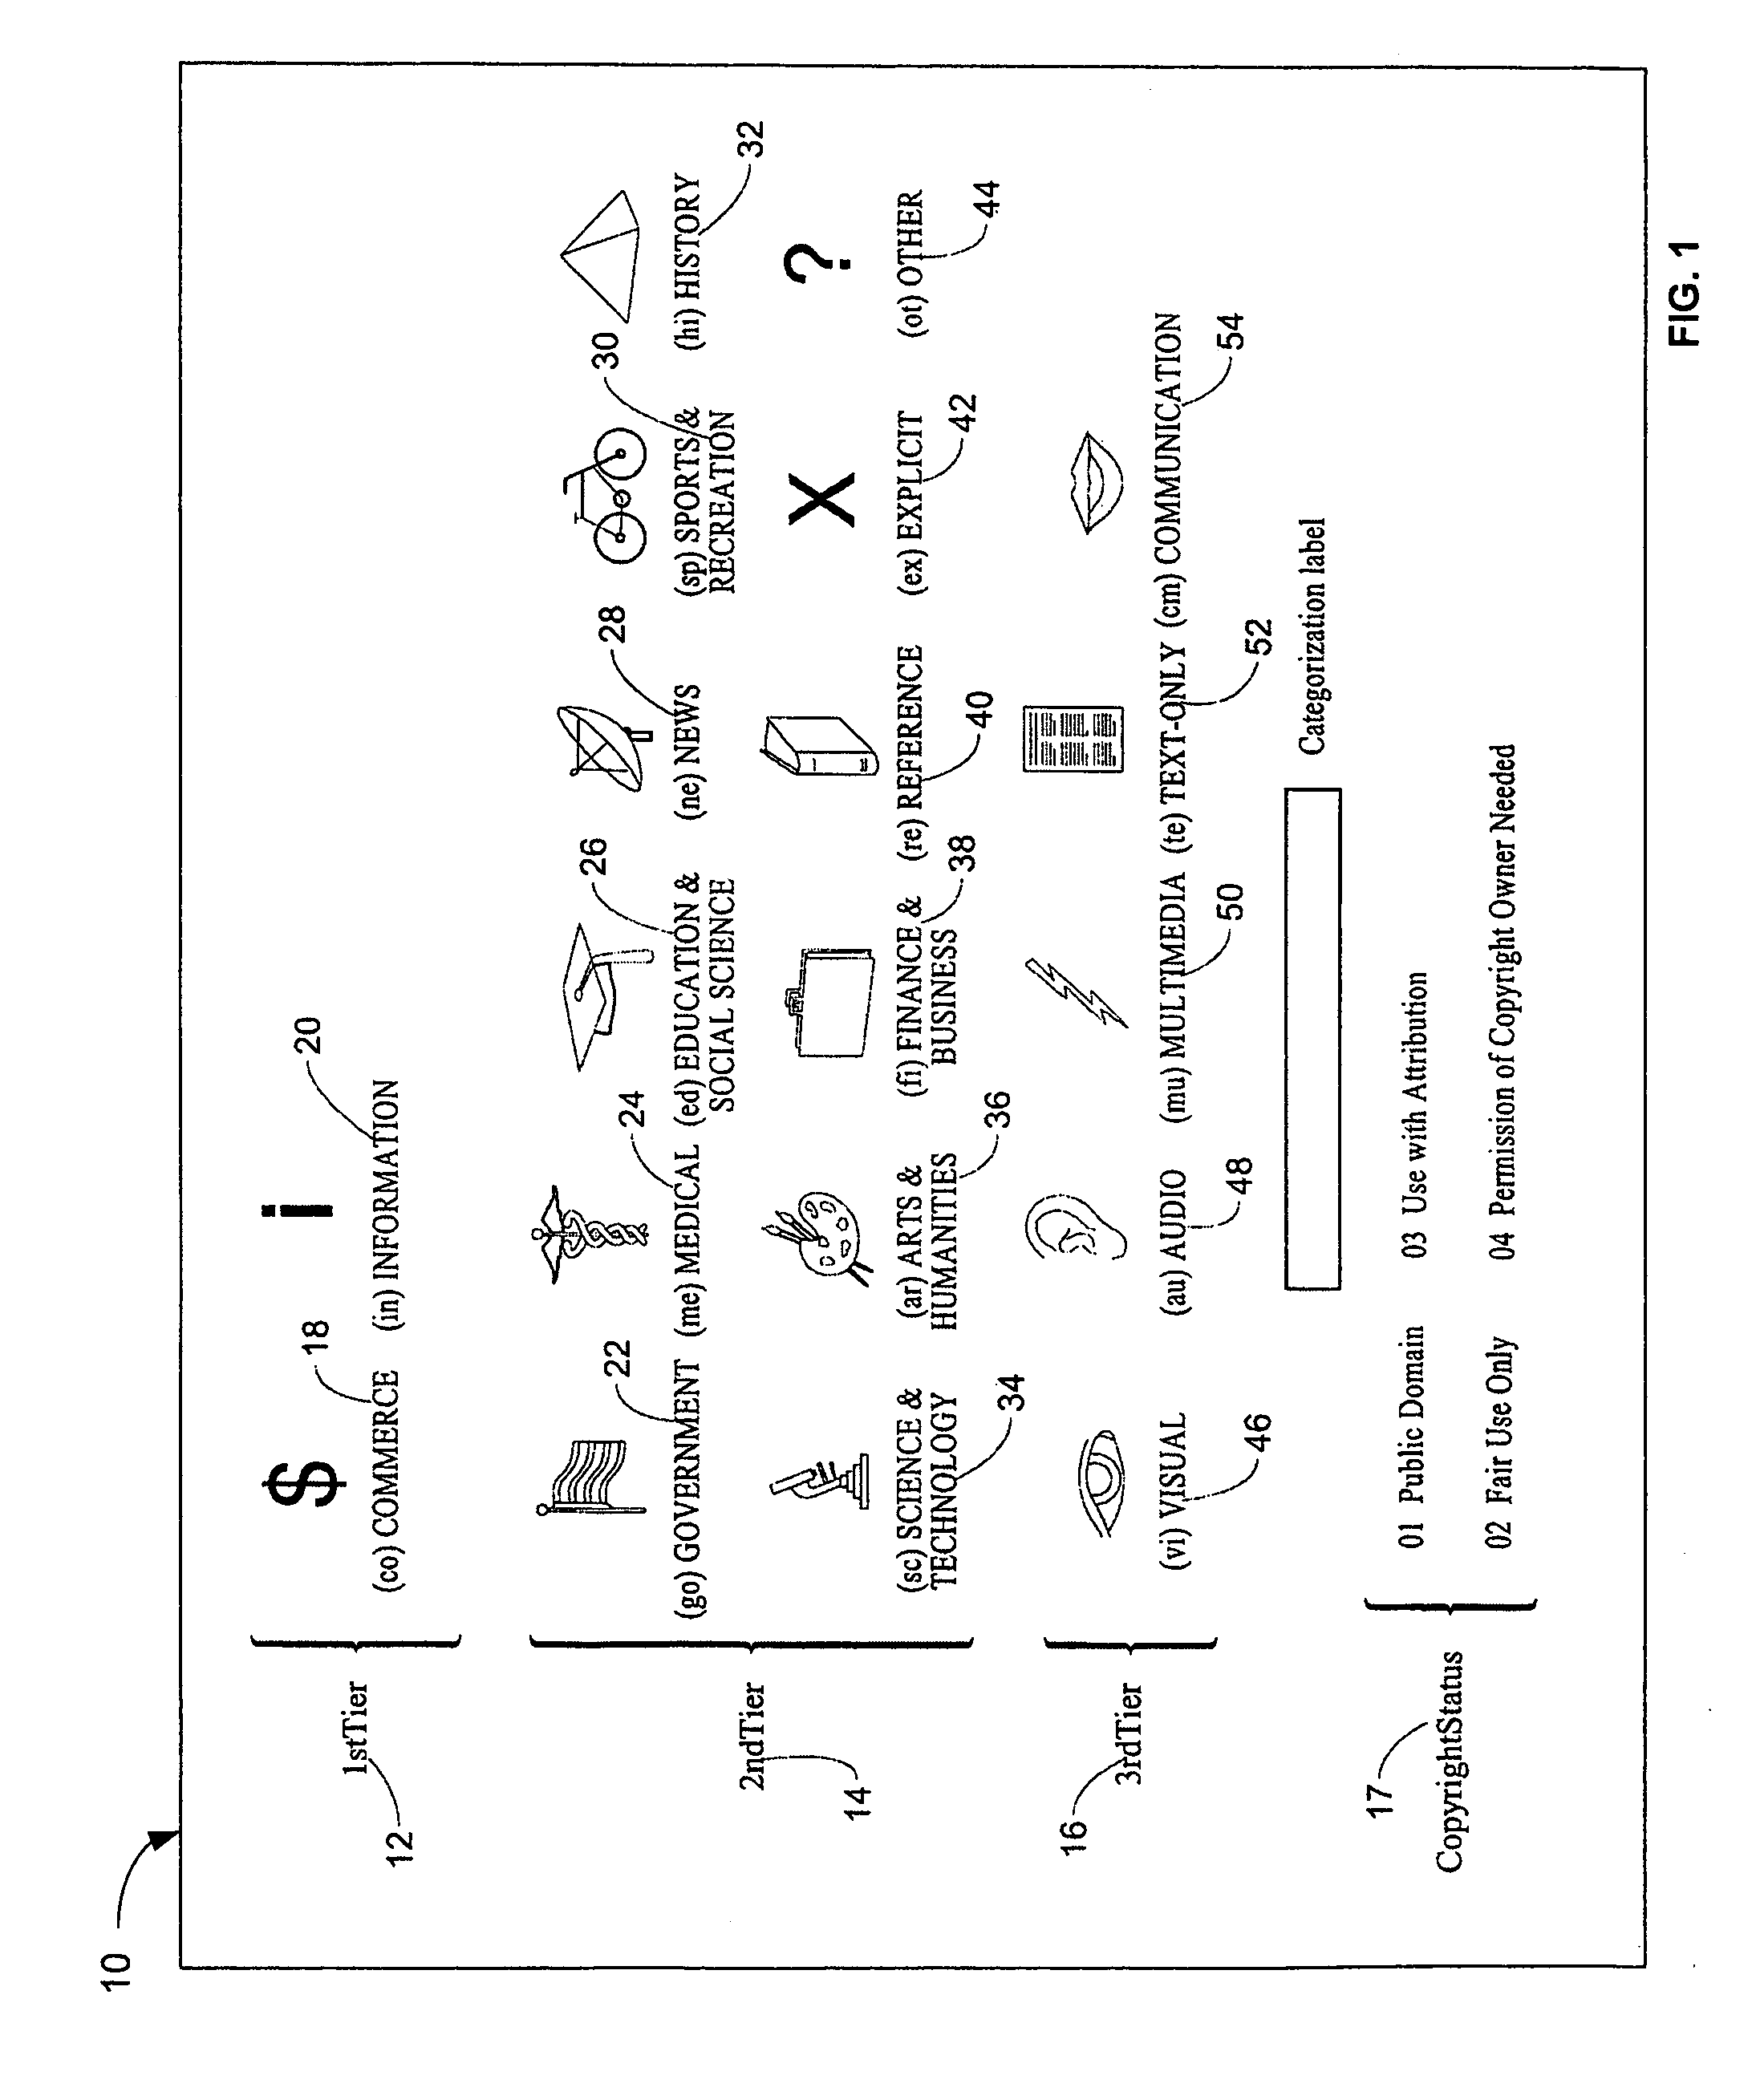 Method of coding, categorizing, and retrieving network pages and sites